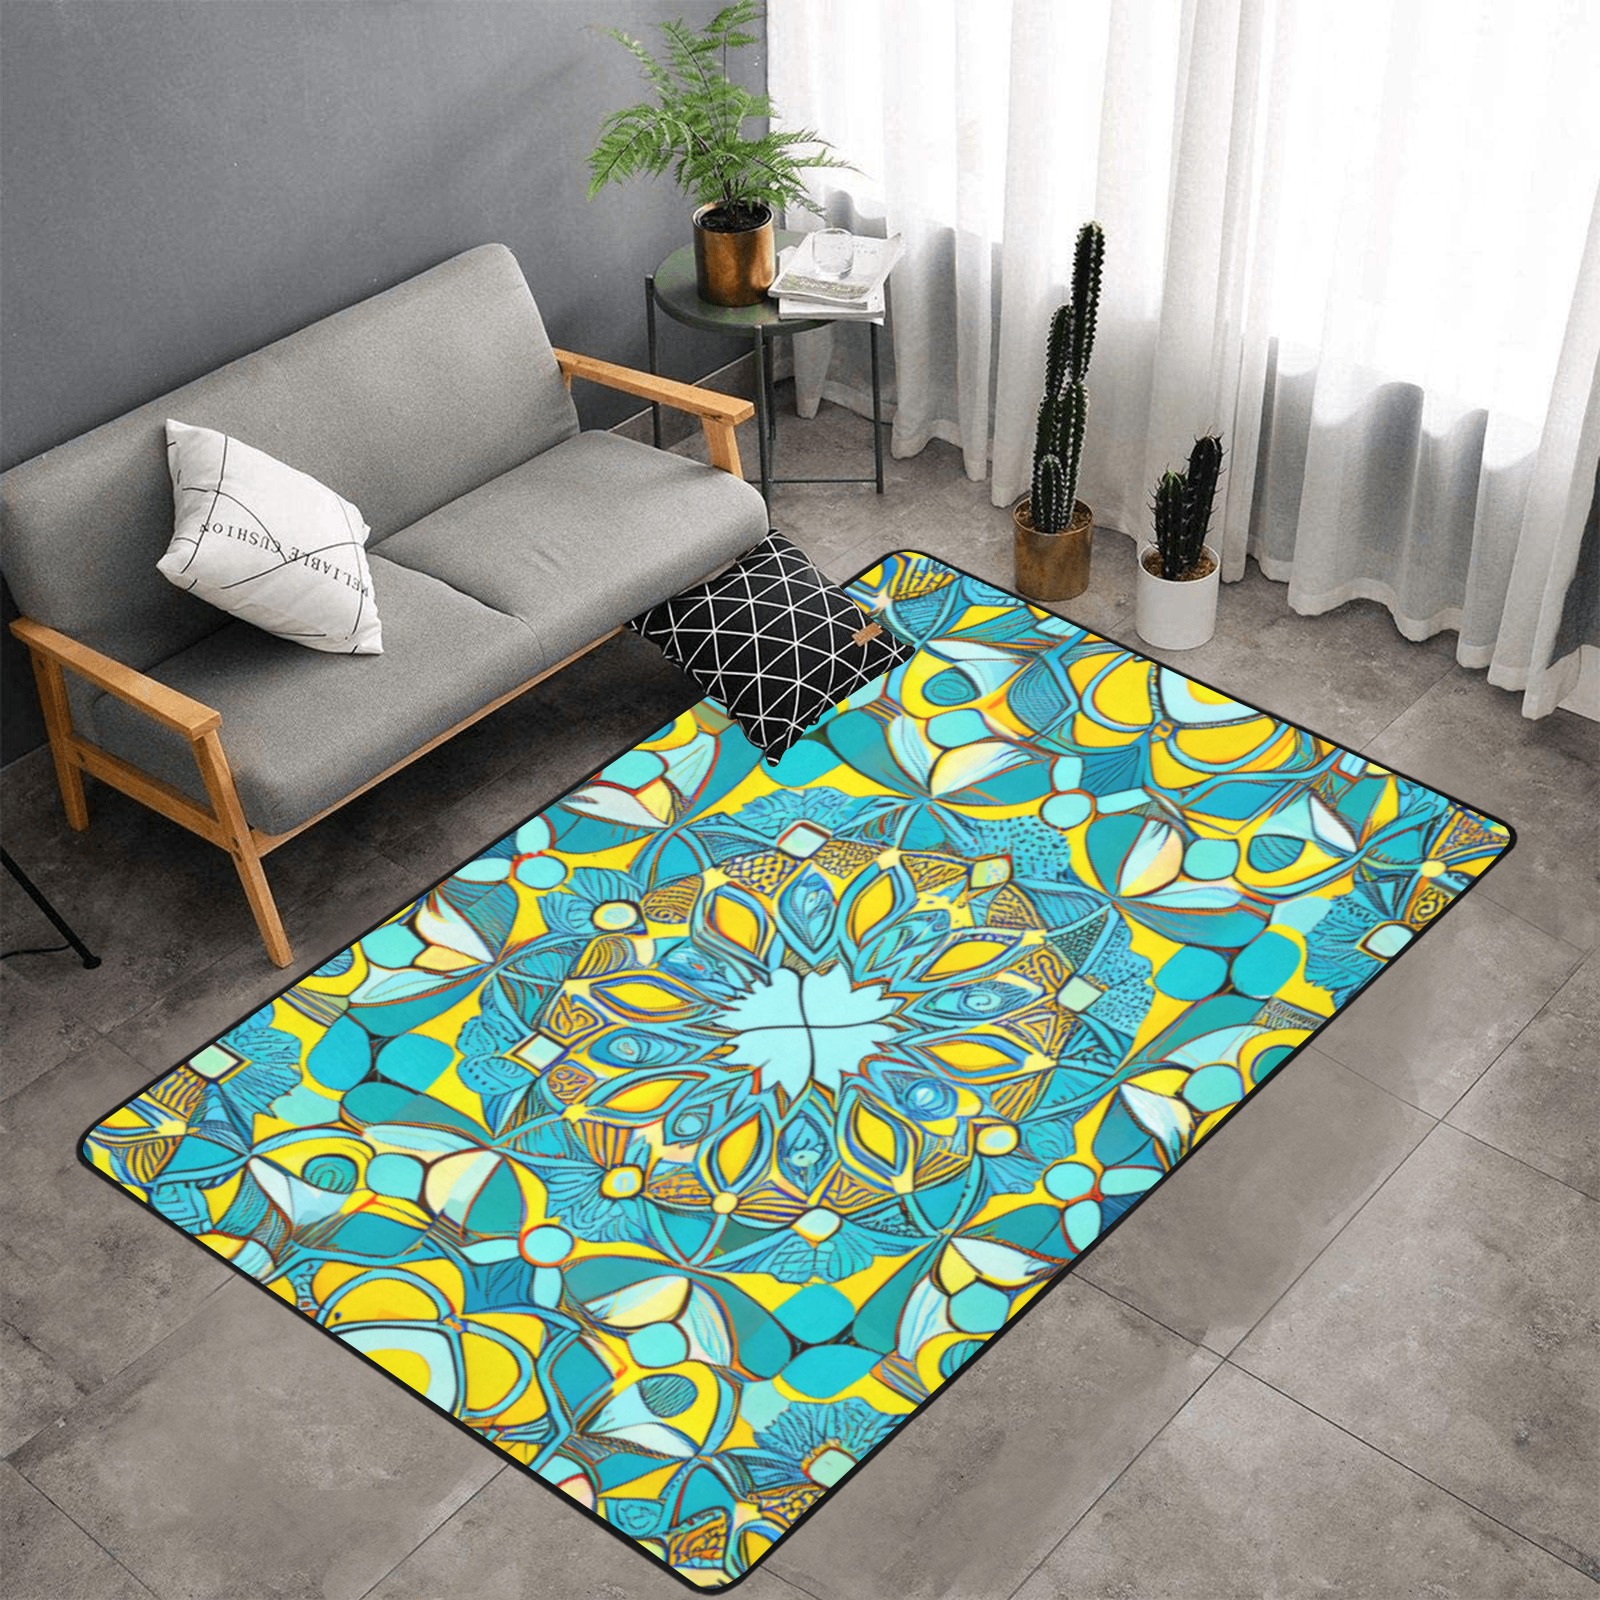 repeating pattern, turquoise and yellow Area Rug with Black Binding 7'x5'